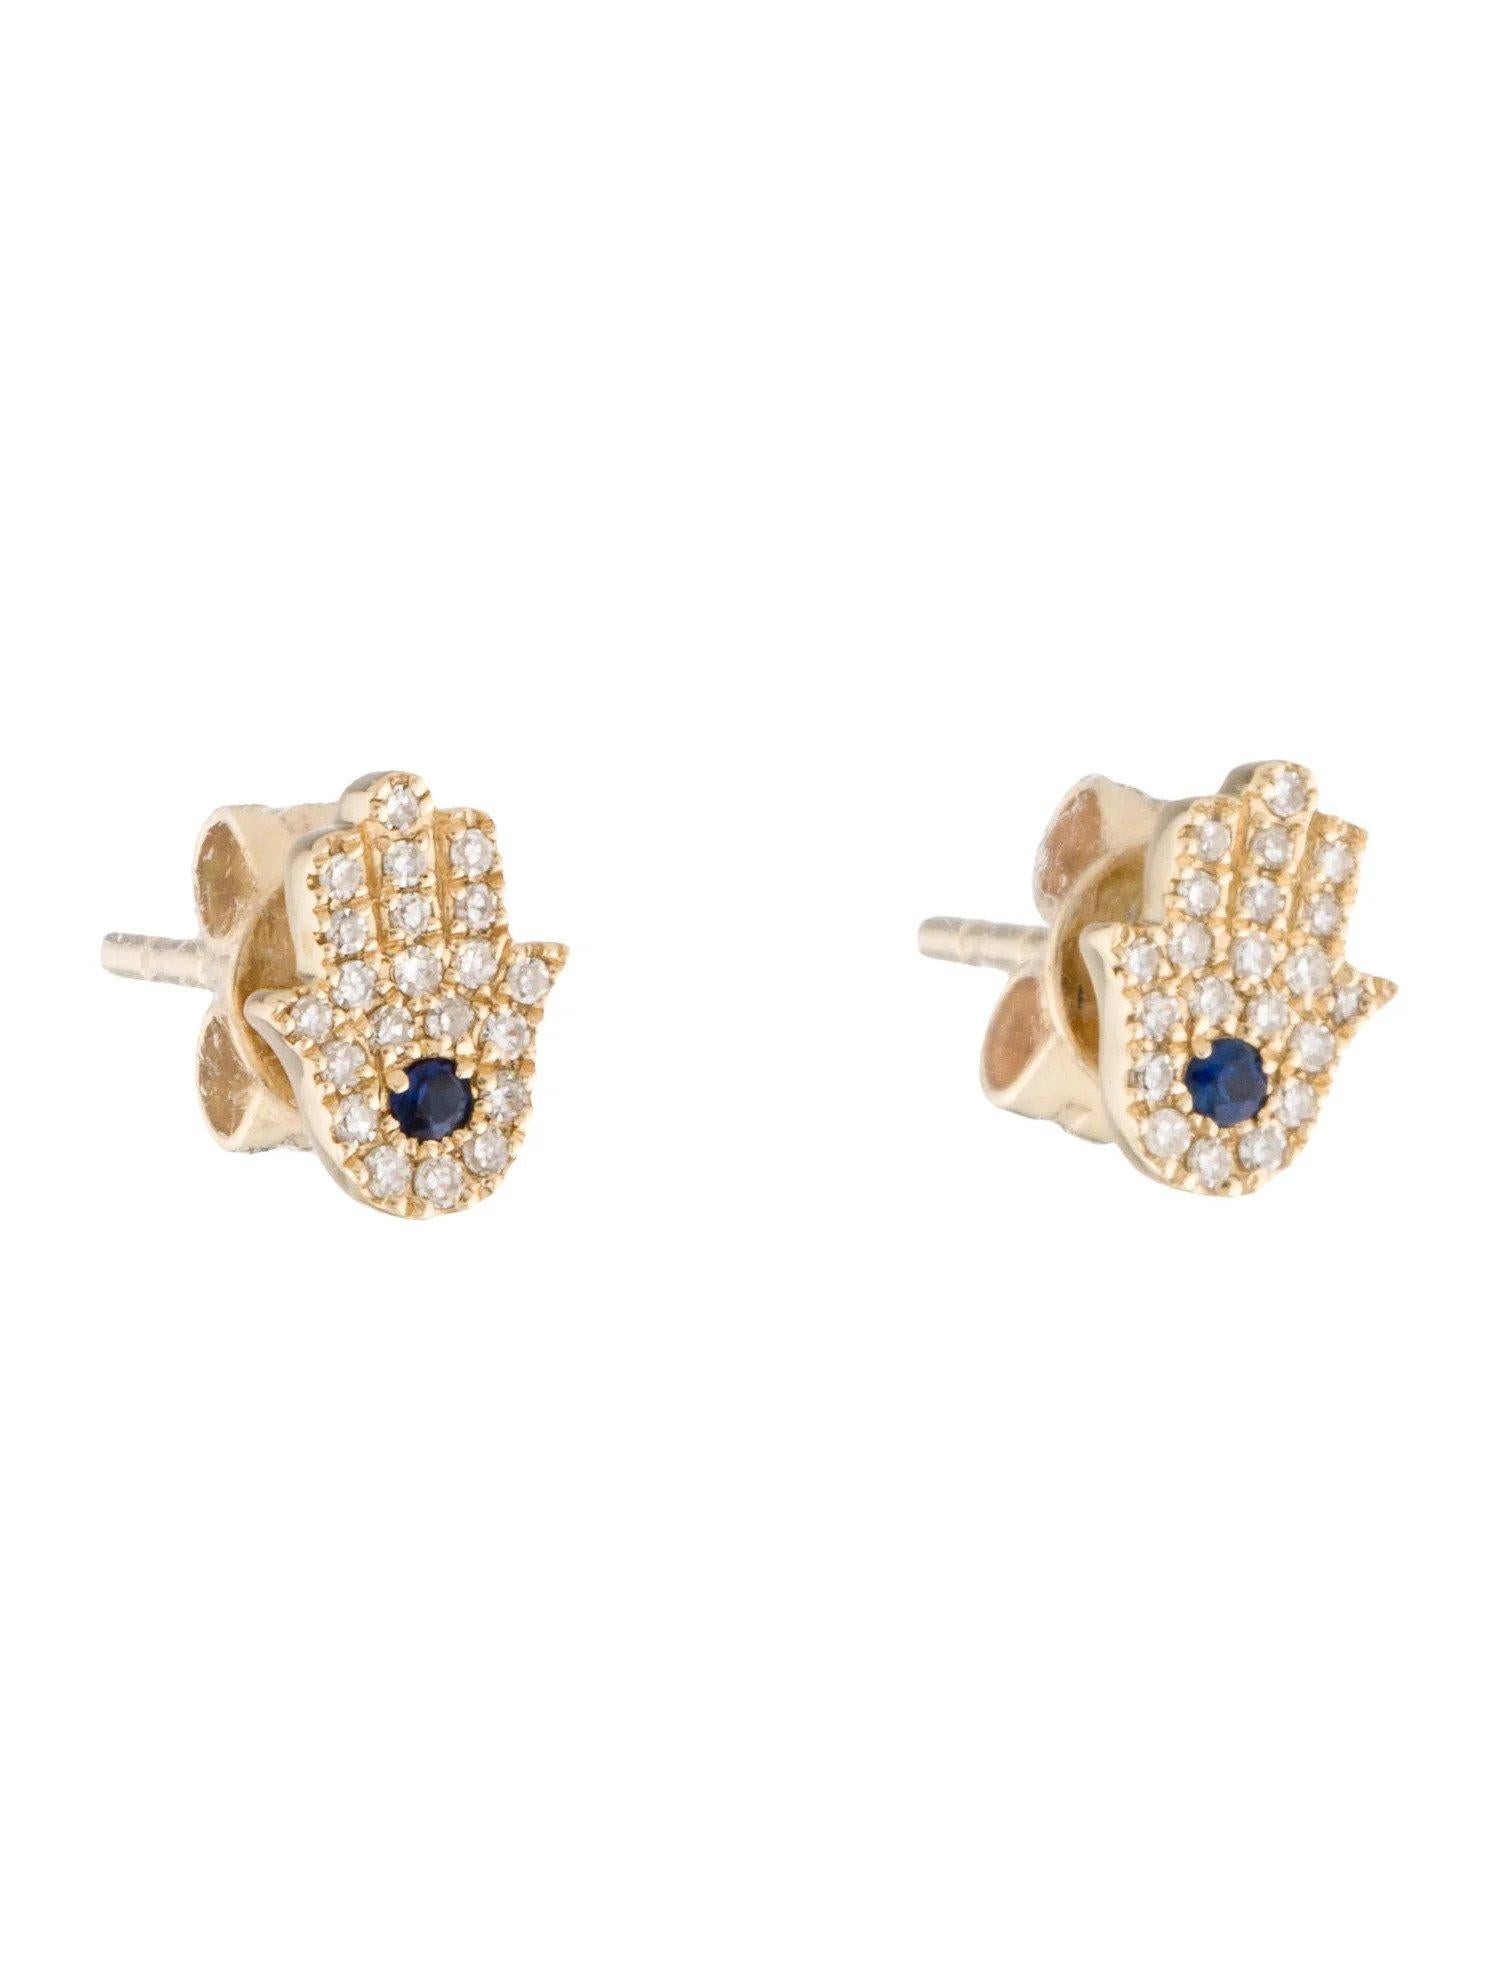 Contemporary 14K Yellow Gold Diamond & Sapphire Hand of Gd Stud Earrings For Sale